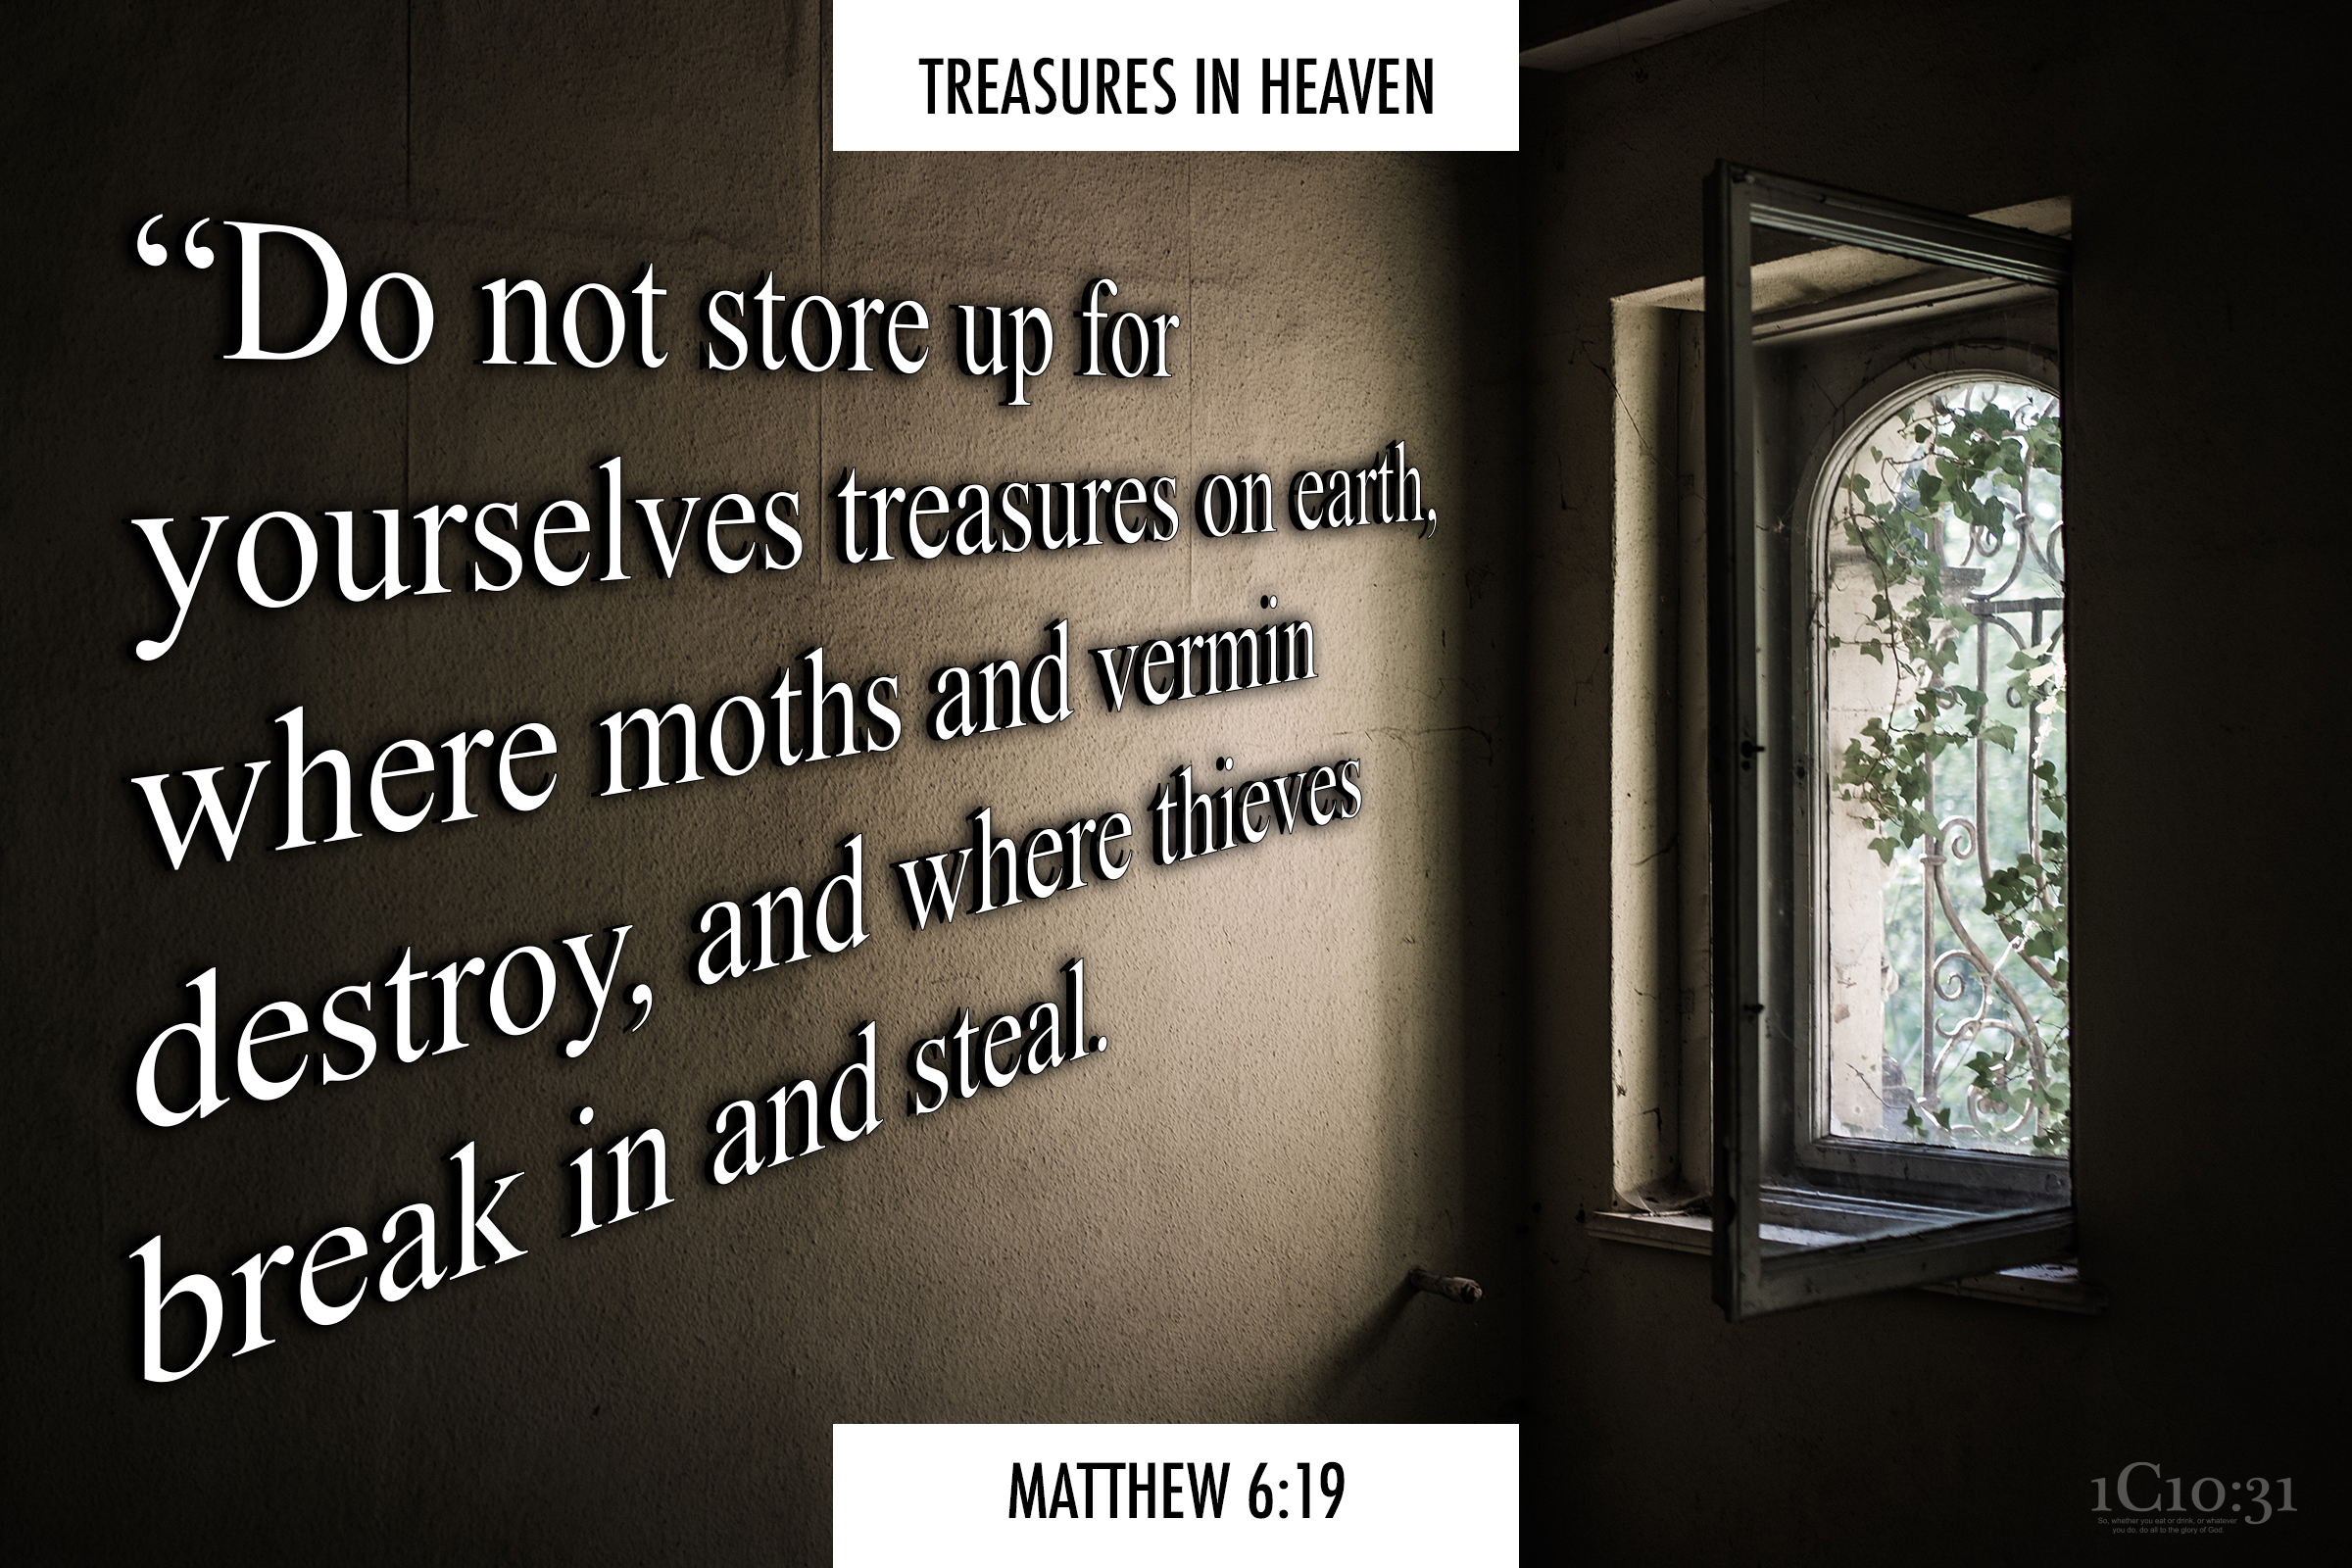 Matthew 6:19 “Do not store up for yourselves treasures on earth, where moths and vermin destroy, and where thieves break in and steal.